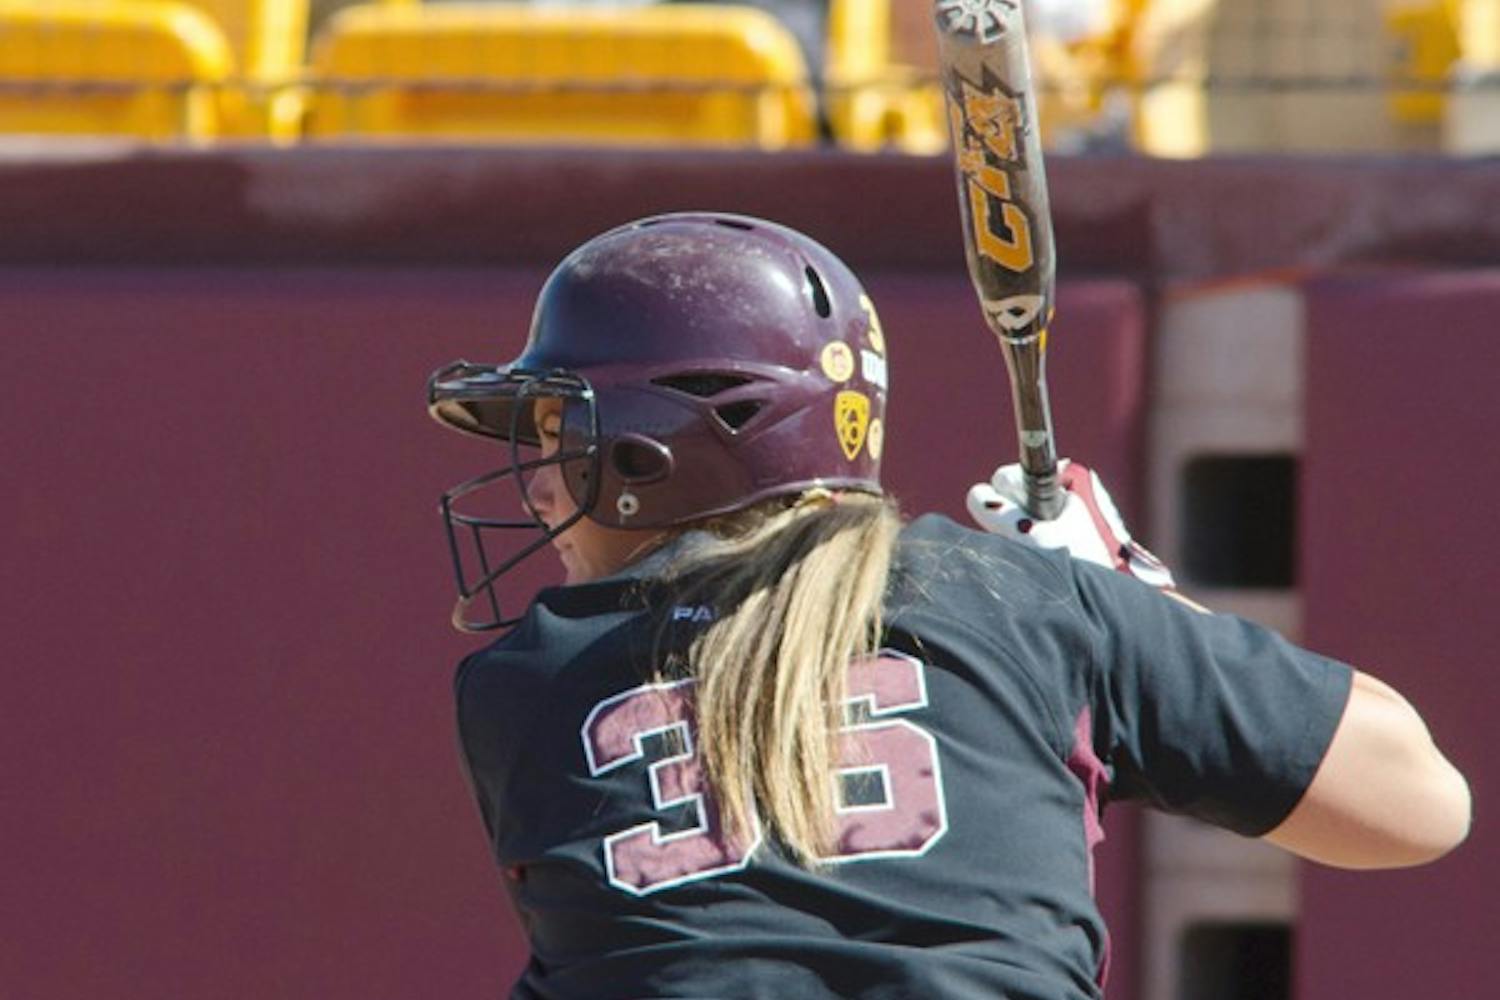 Championship-bound: ASU senior Mandy Urfer waits for a pitch during the Sun Devils’ 8-0 win over Long Beach State on May 21. Urfer had a two-RBI home run in the ASU victory over Baylor on Sunday. (Photo by Aaron Lavinsky)